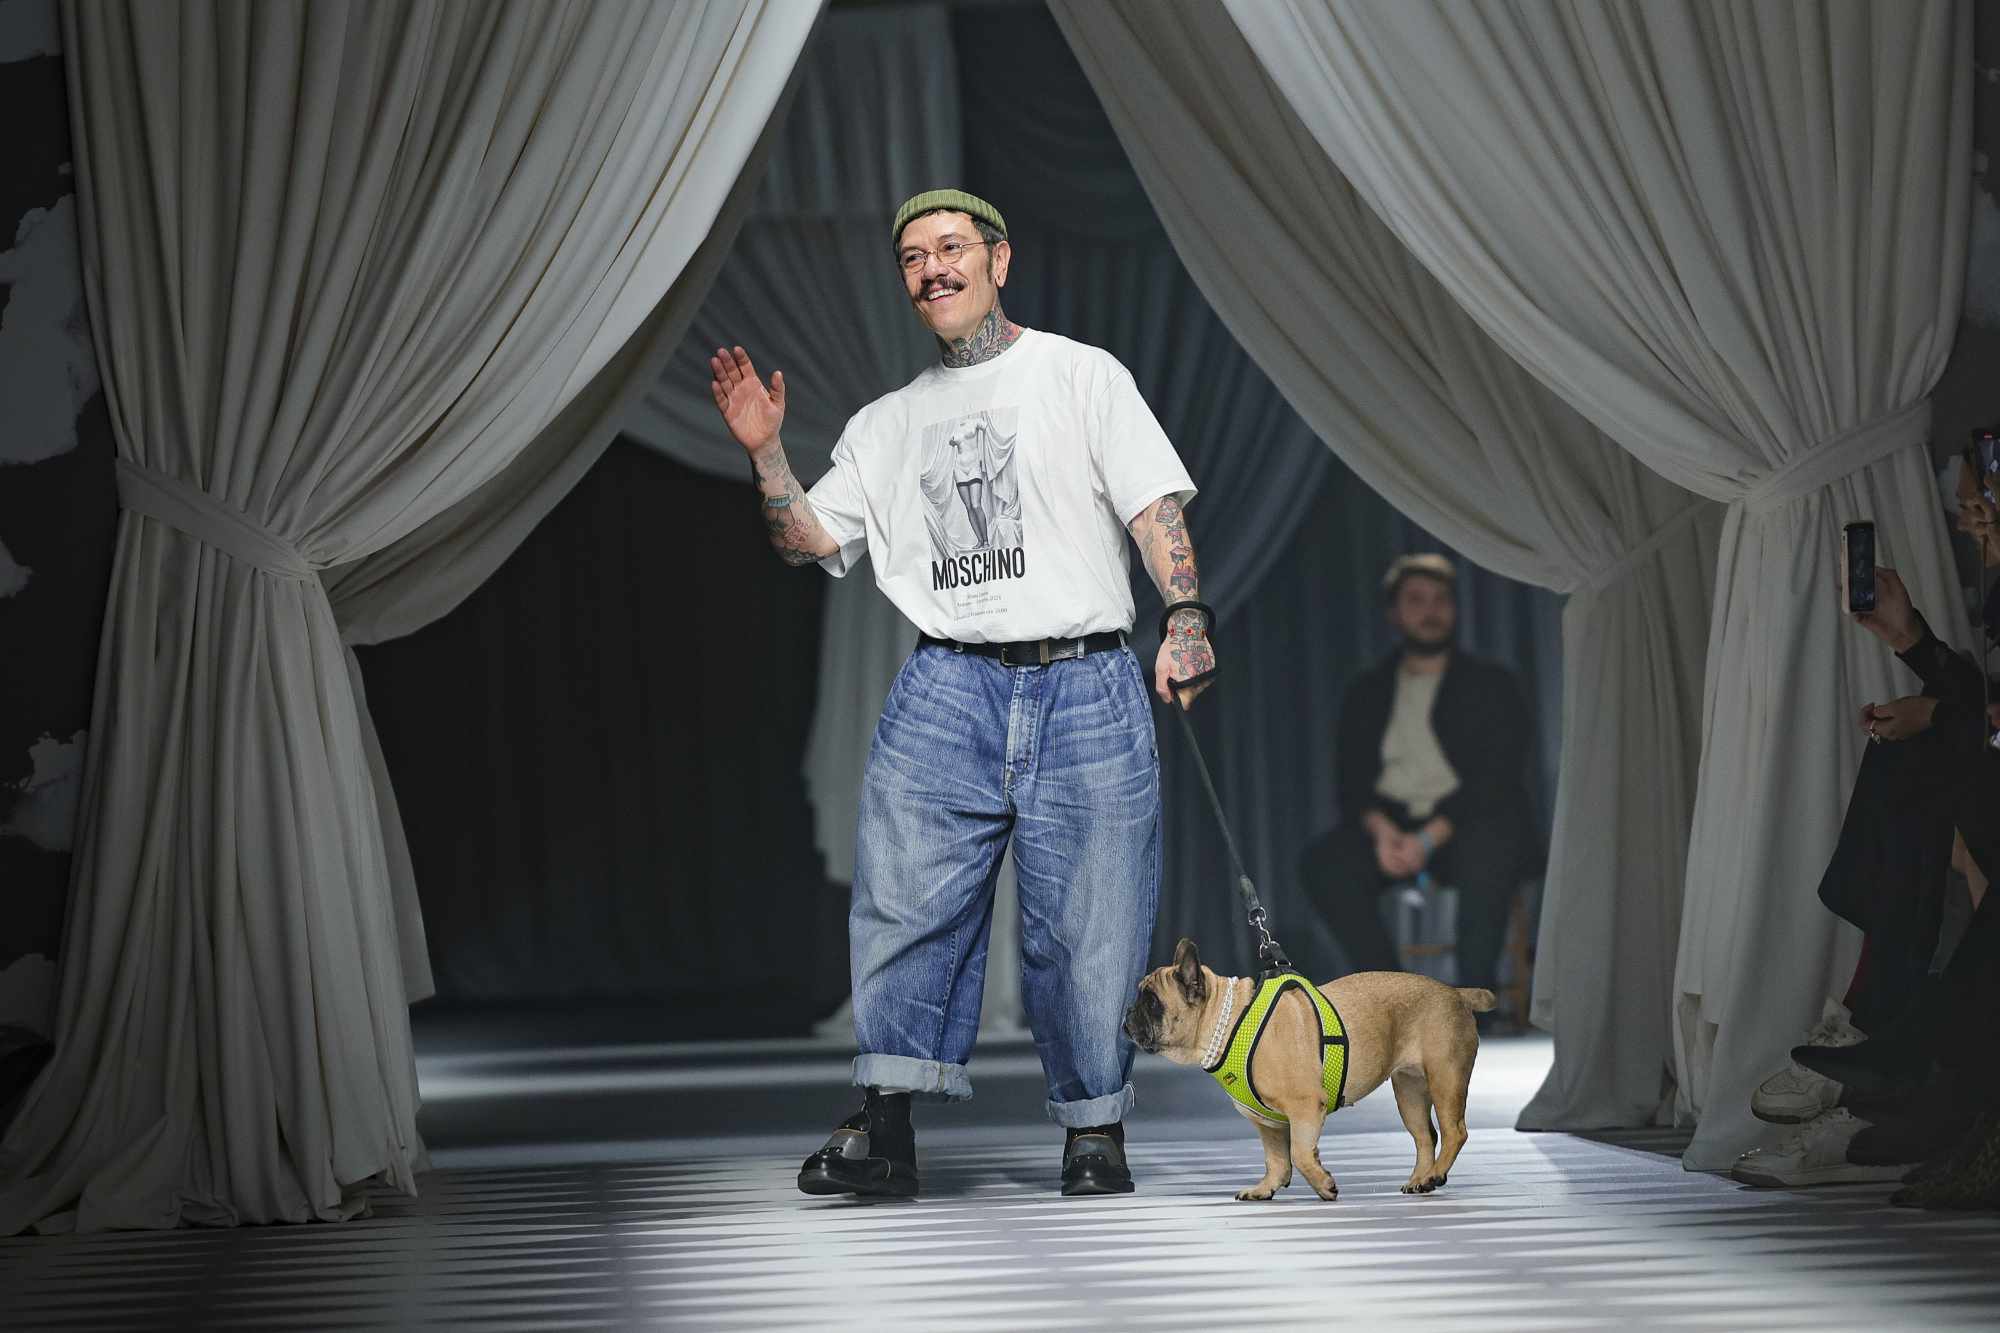 Moschino creative director Adrian Appiolaza wears a white t-shirt and blue jeans with his pug